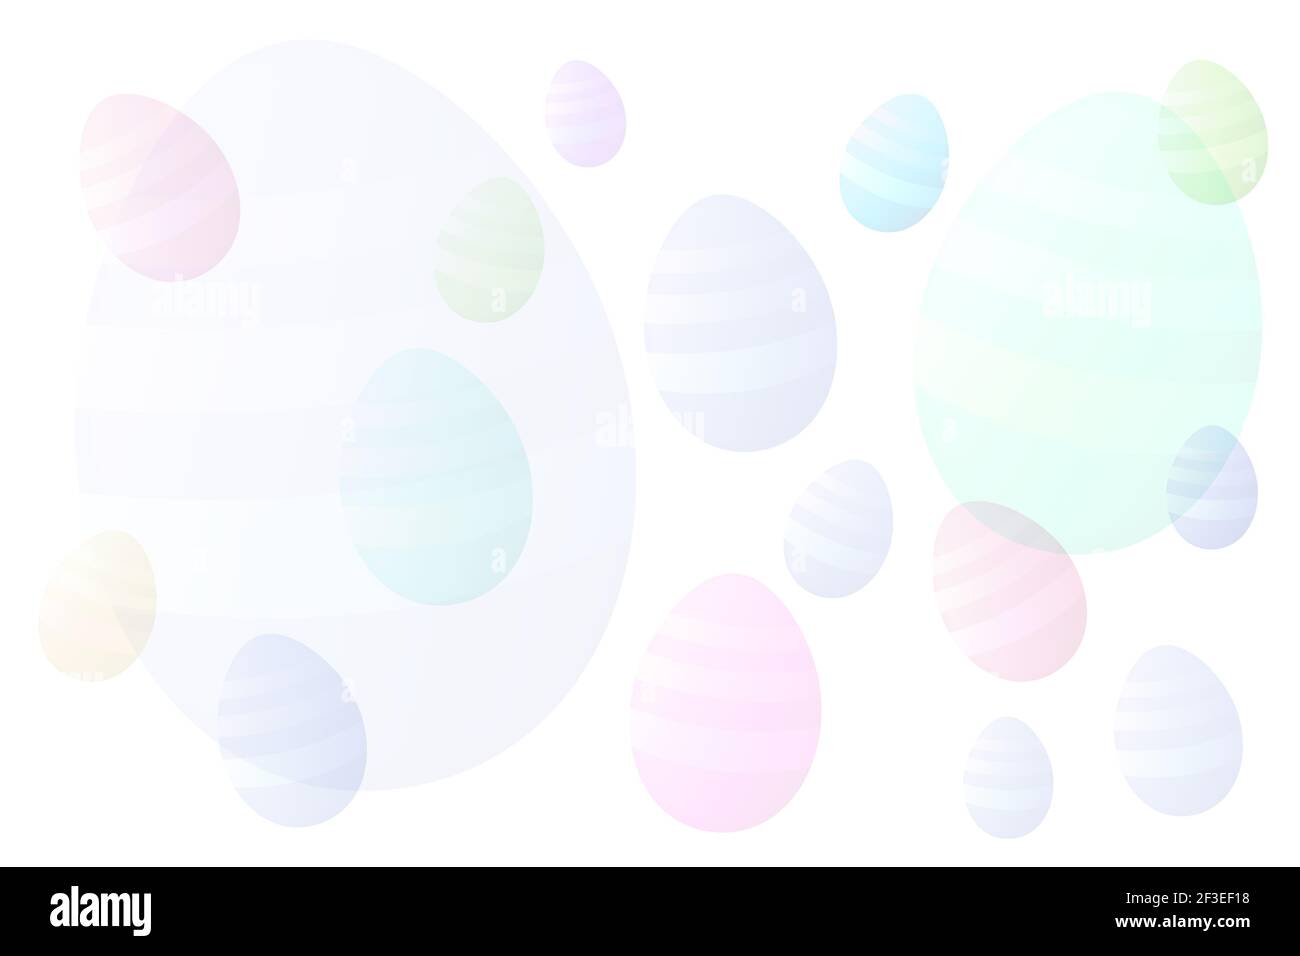 light pastel colored faded effect easter eggs over white background illustration Stock Photo